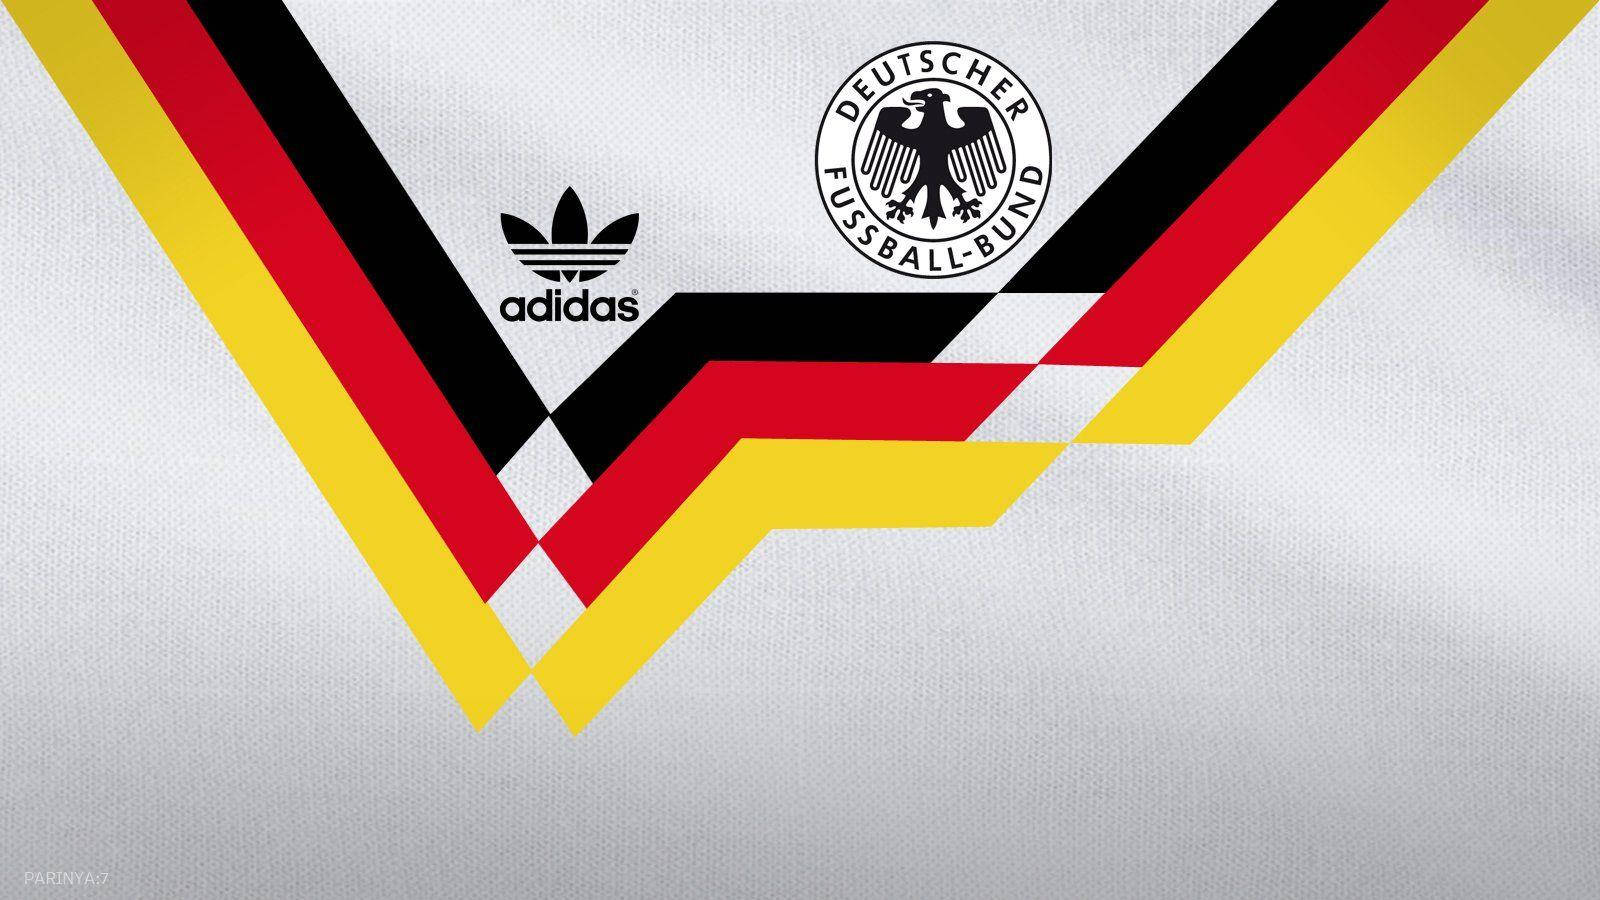 Germany National Football Team 1990 Adidas Retro Print Picture